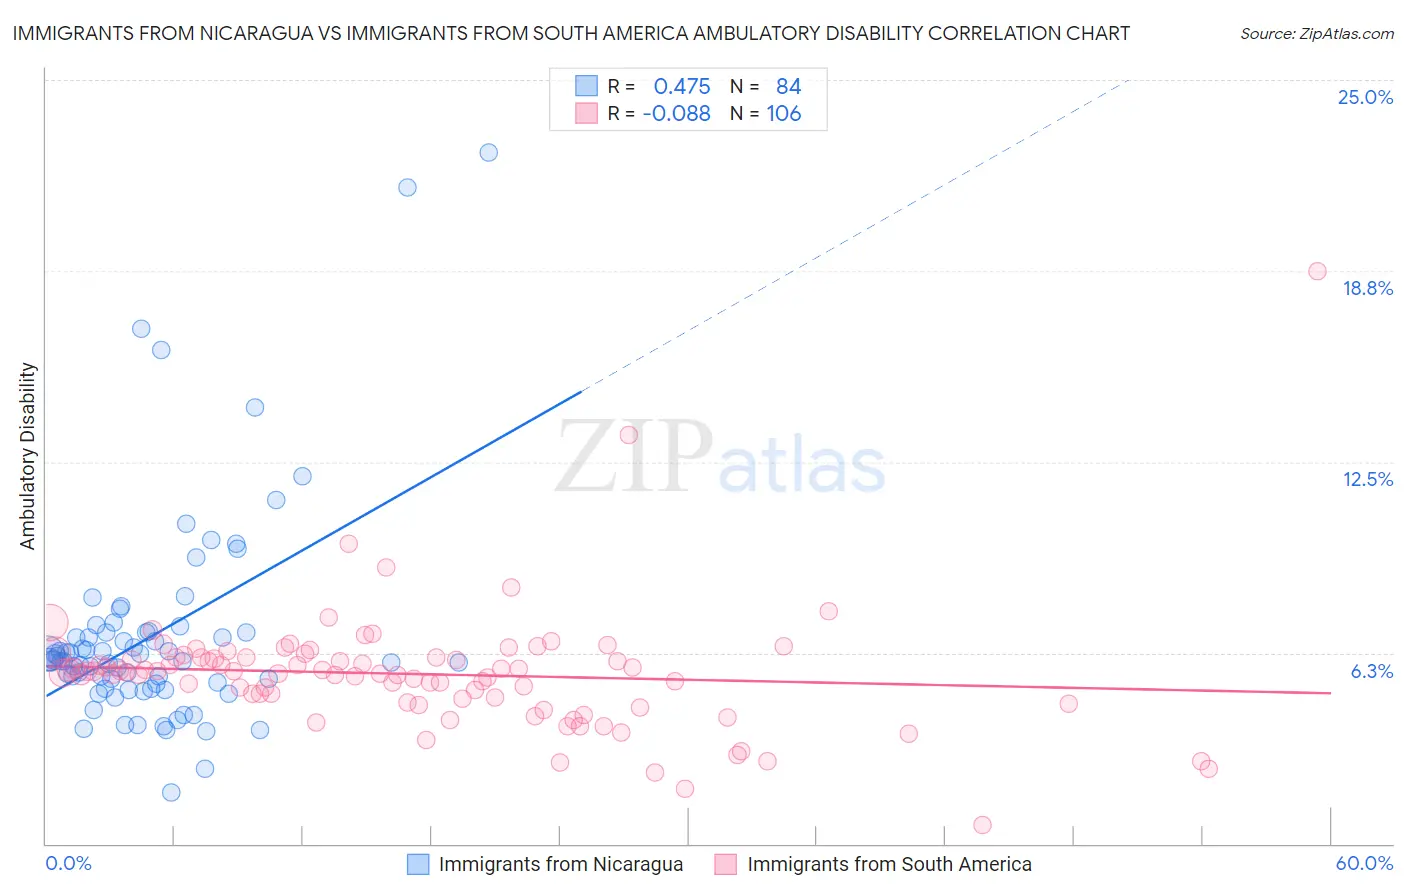 Immigrants from Nicaragua vs Immigrants from South America Ambulatory Disability